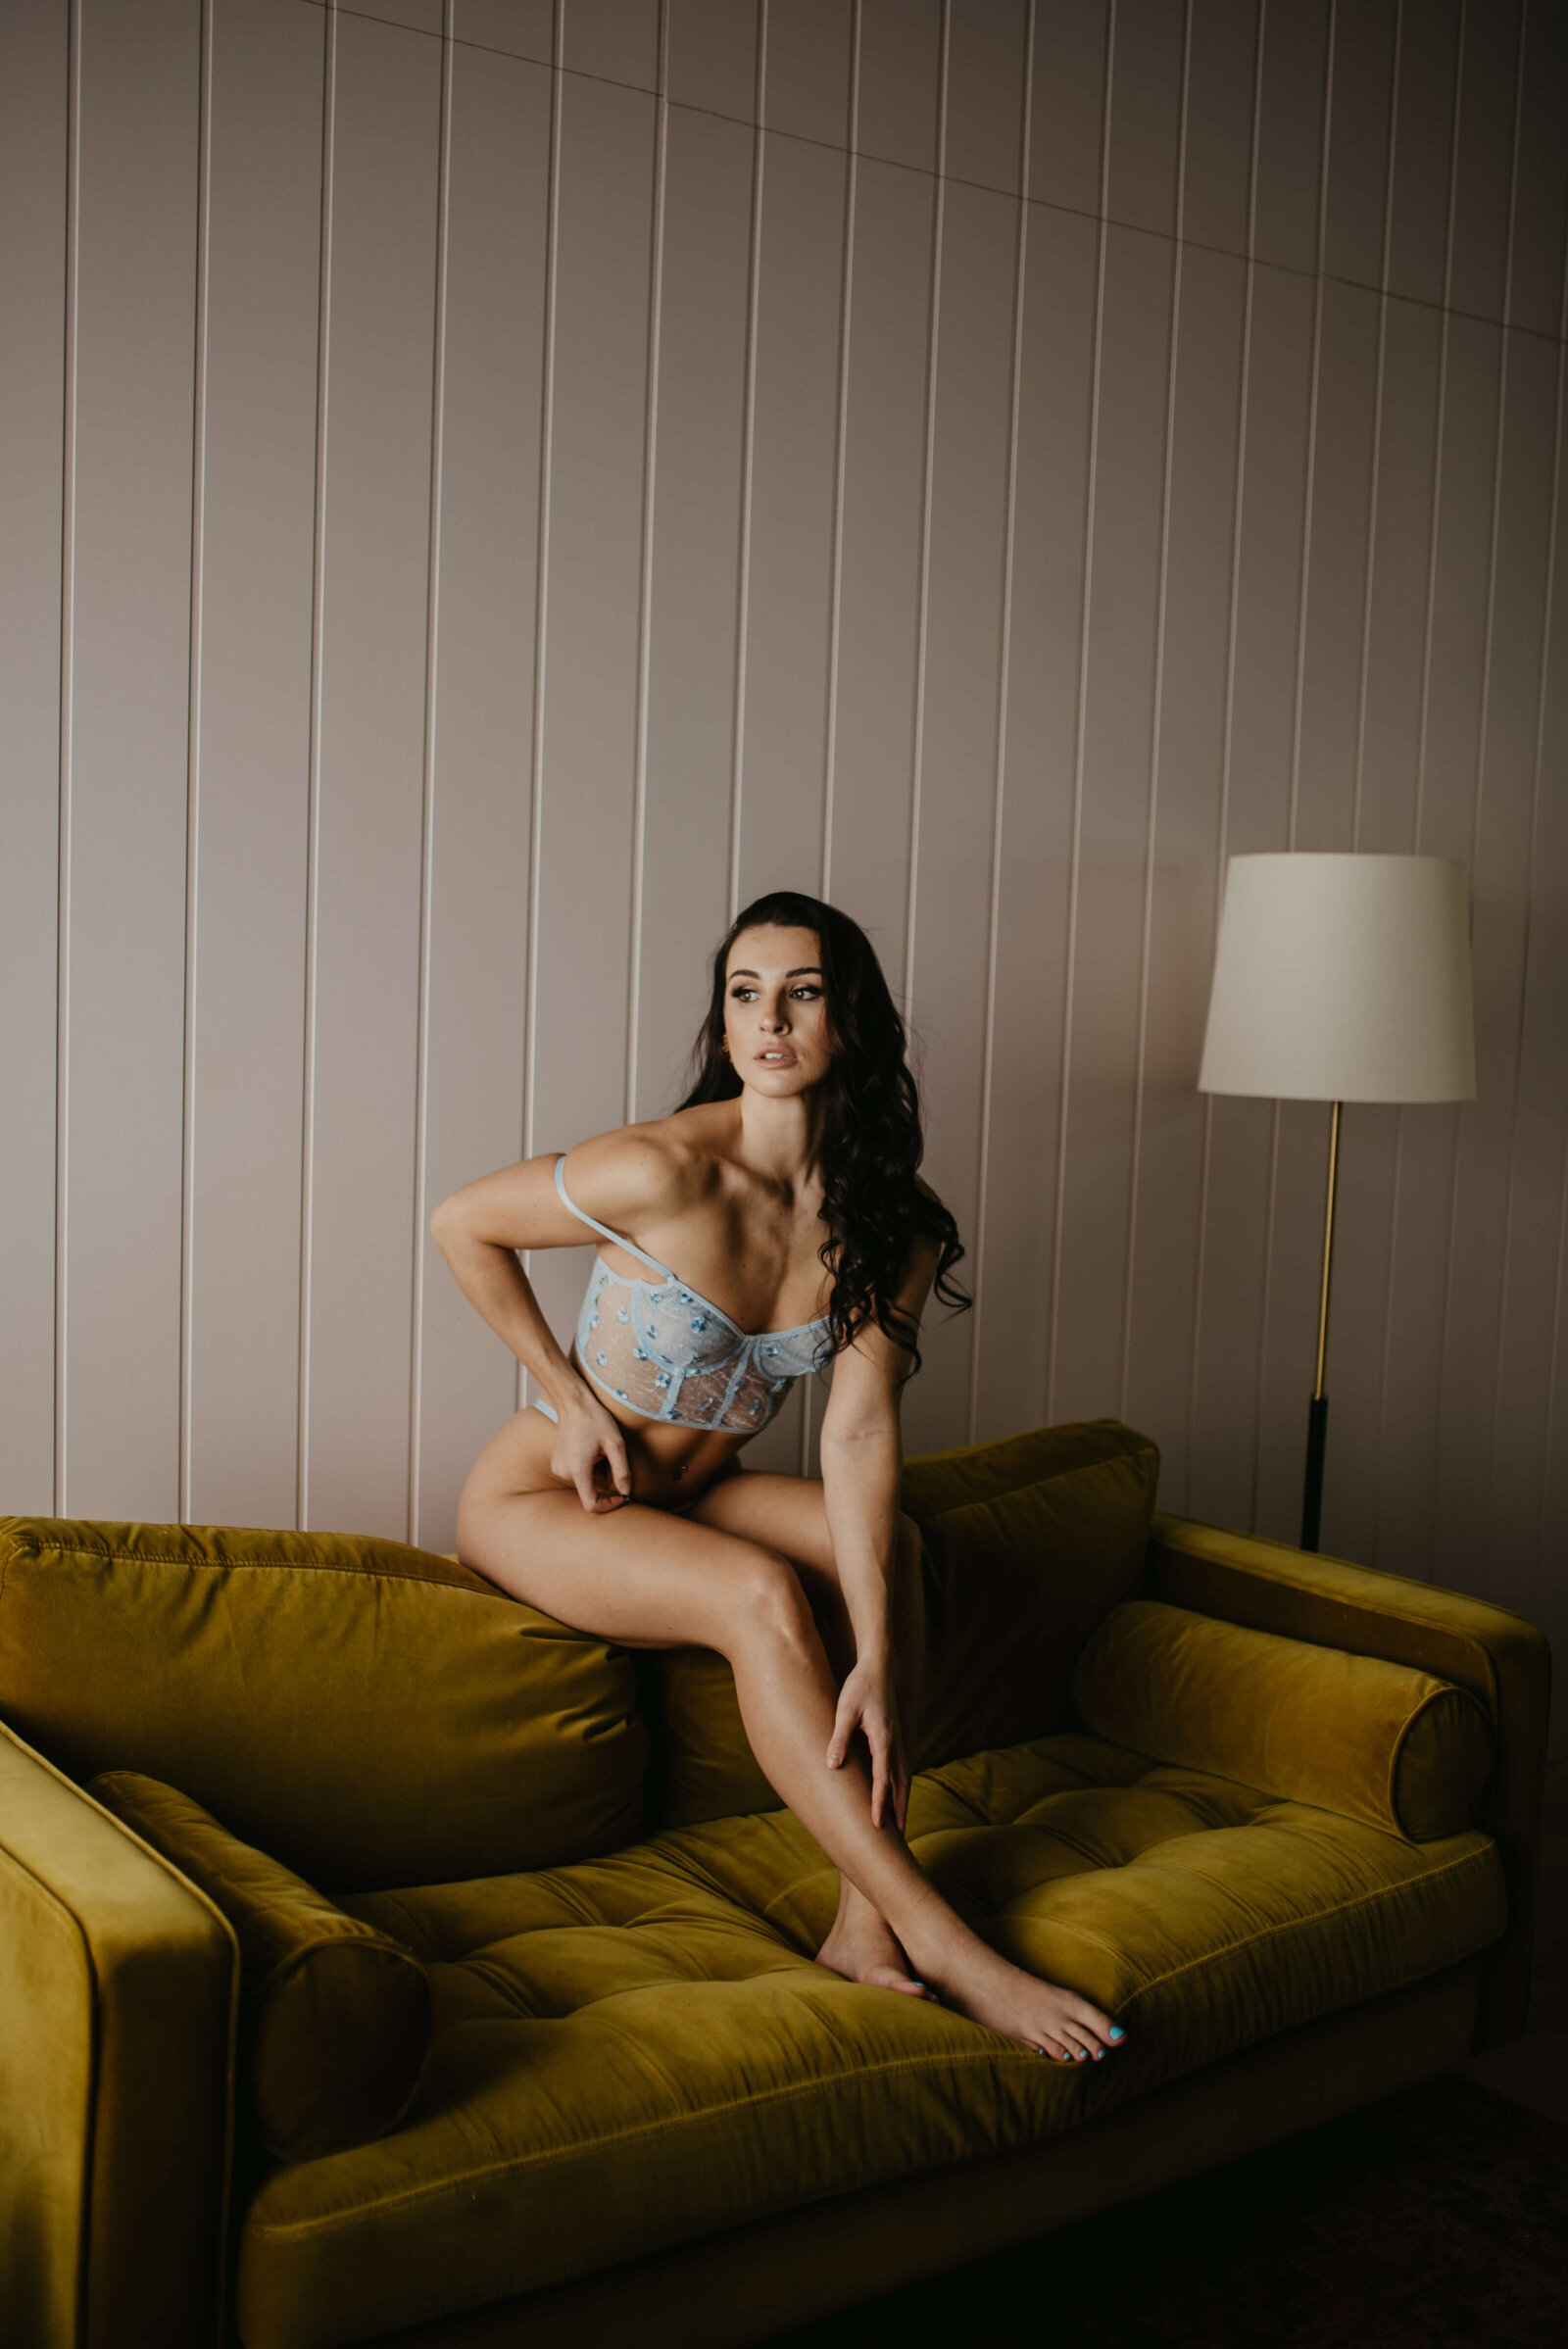 Woman sitting on the back of the couch in lingerie